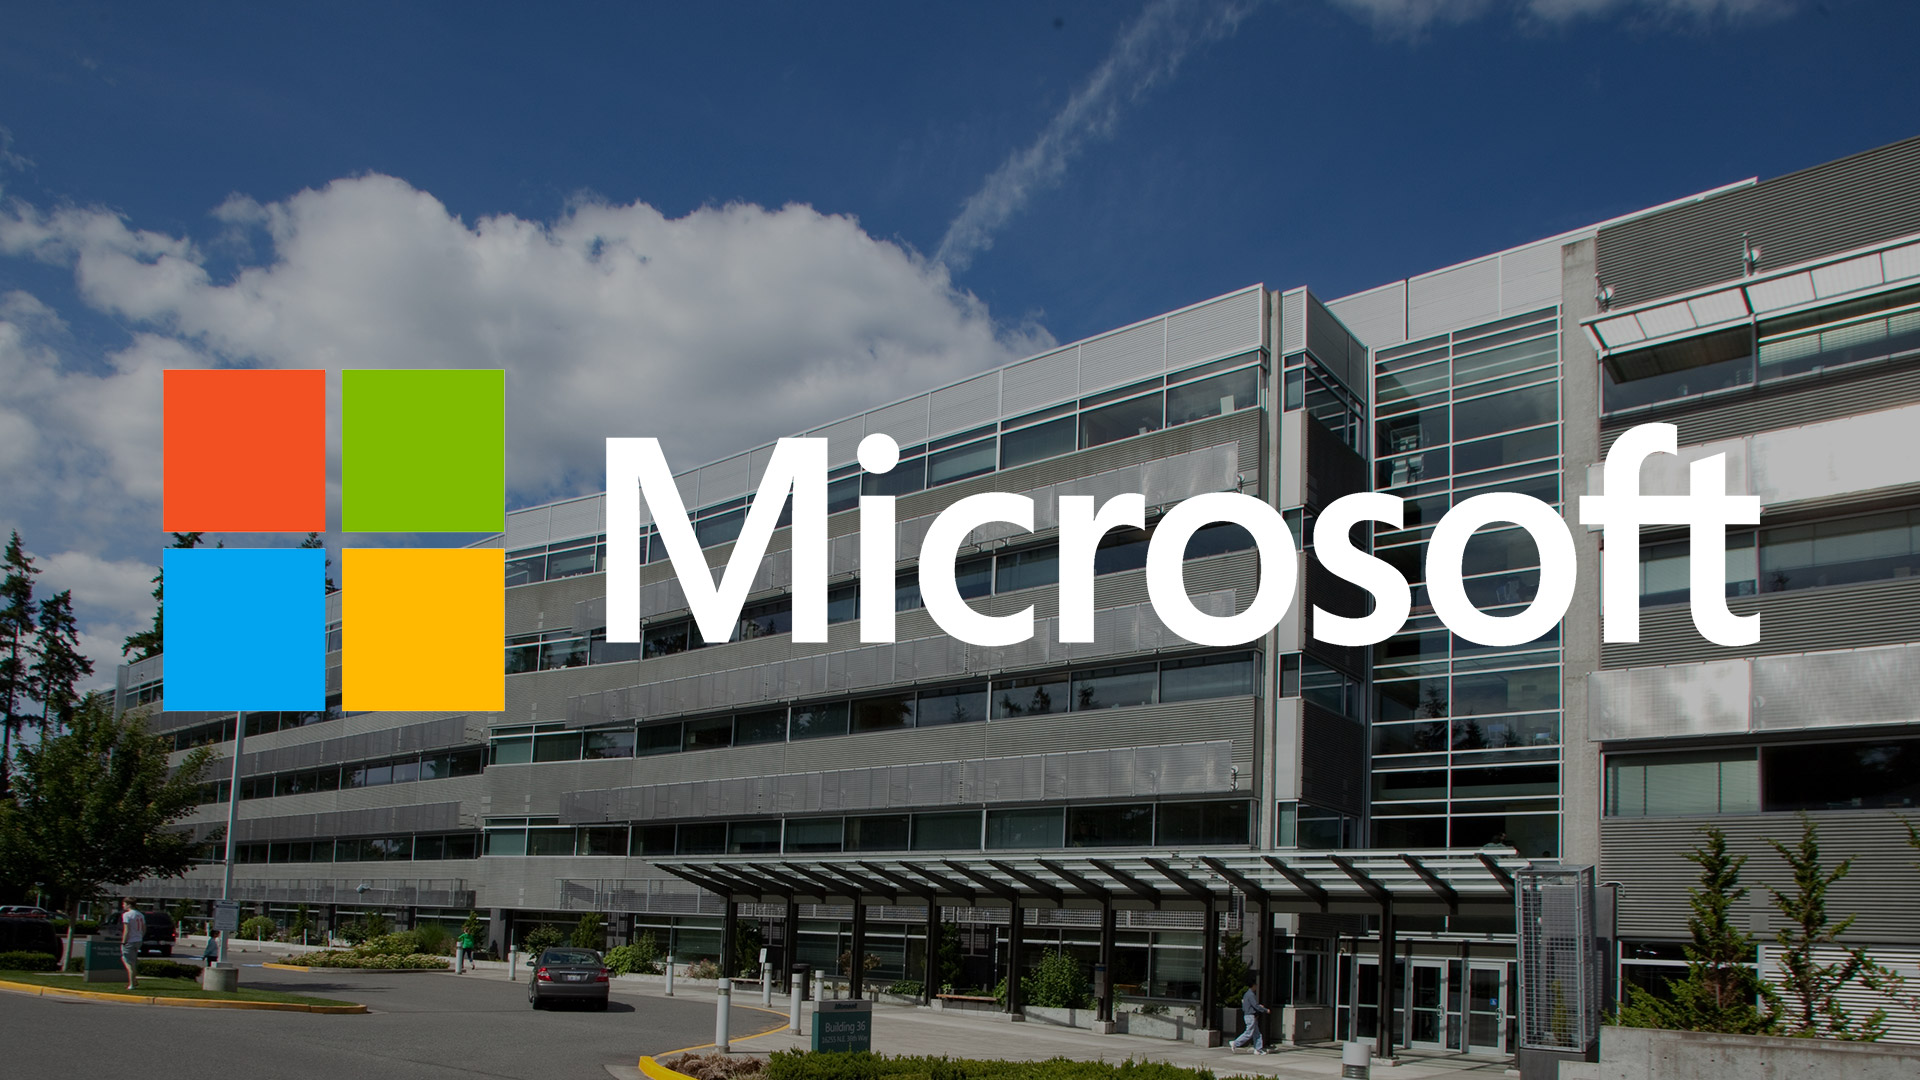 Microsoft may be the part of September 7 event, crashing the iPhone 7 Event